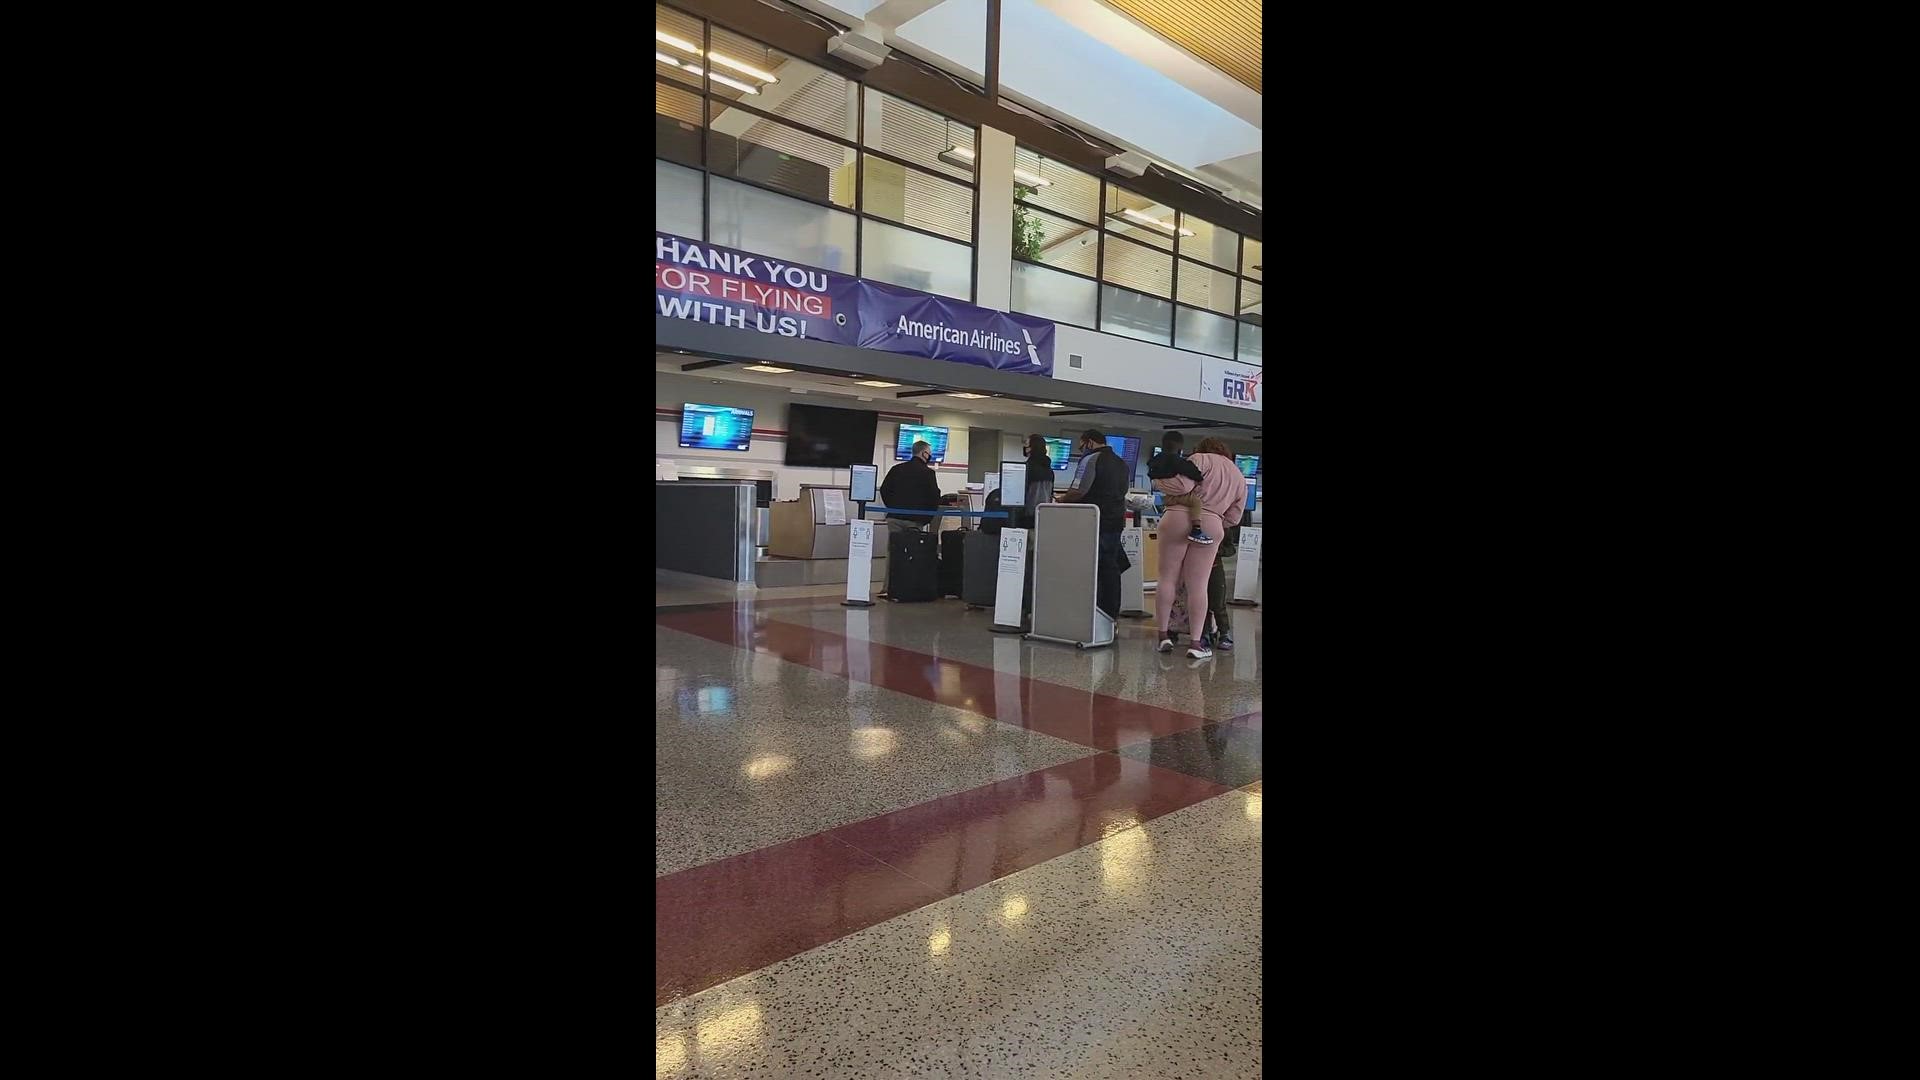 Man claims  Killeen Airport American Airlines is short-staffed, travelers waiting but no one is behind the desk to check-in
Credit: Tyrone